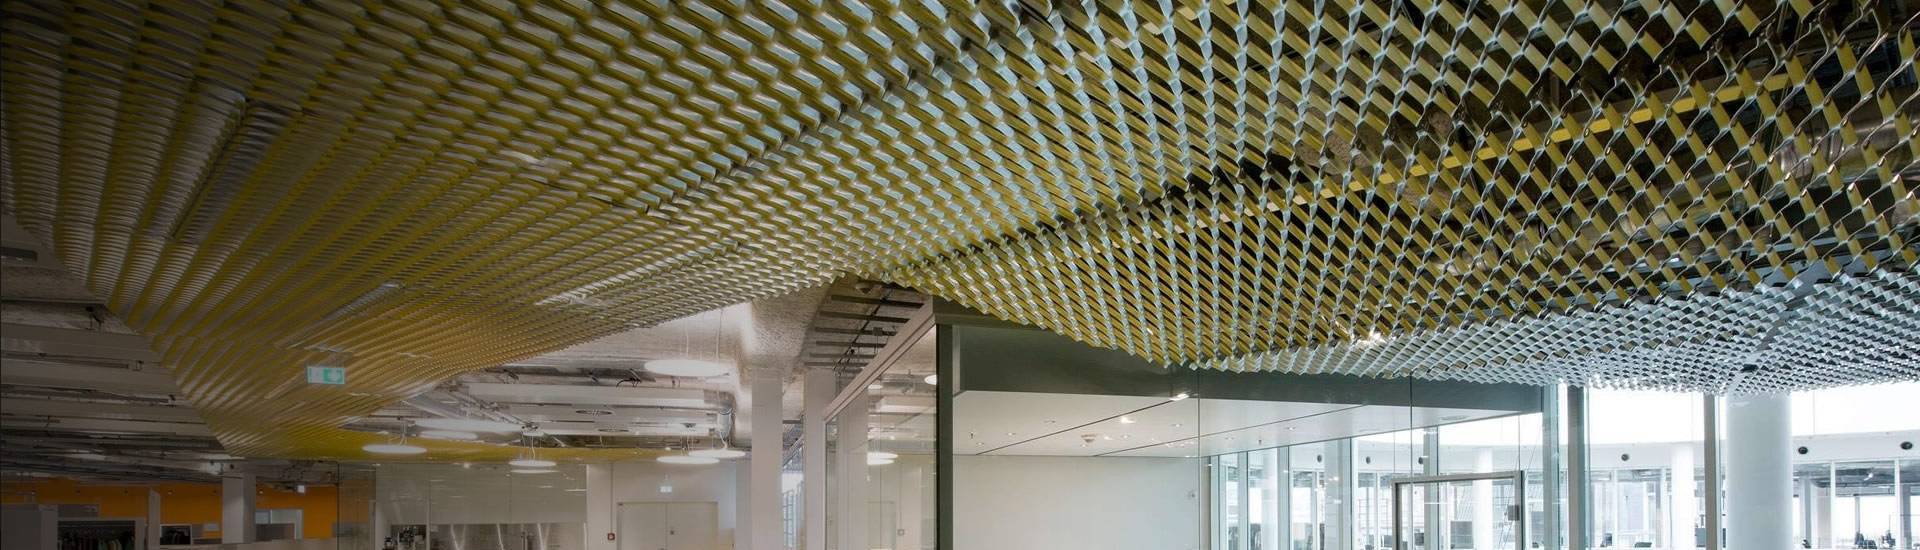 Decorative expanded metal mesh for interior ceiling decoration